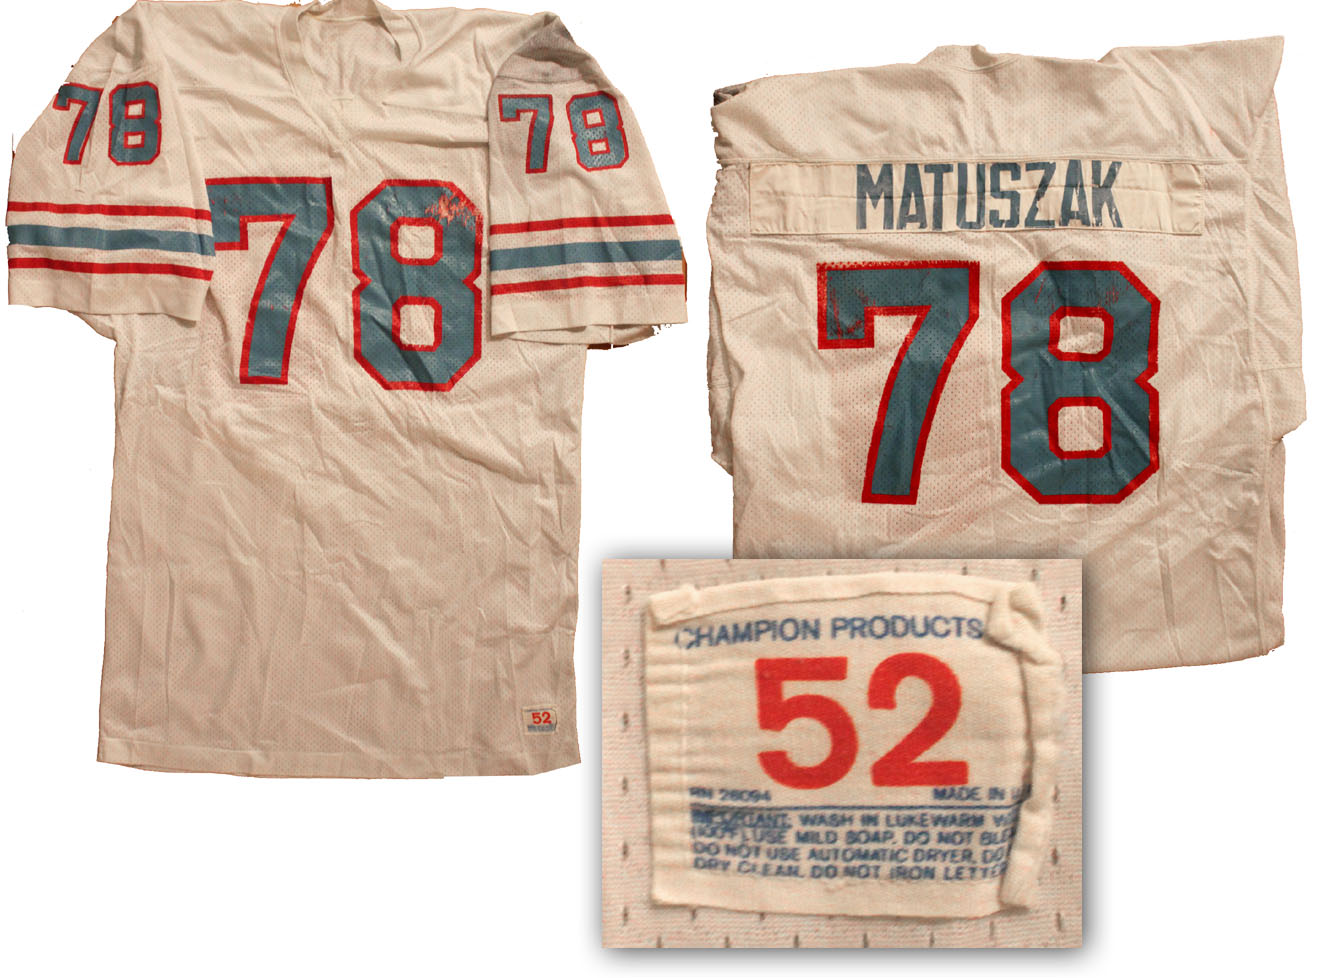 Sell Your John Matuszak Game Worn Jersey at Nate D. Sanders Auctions